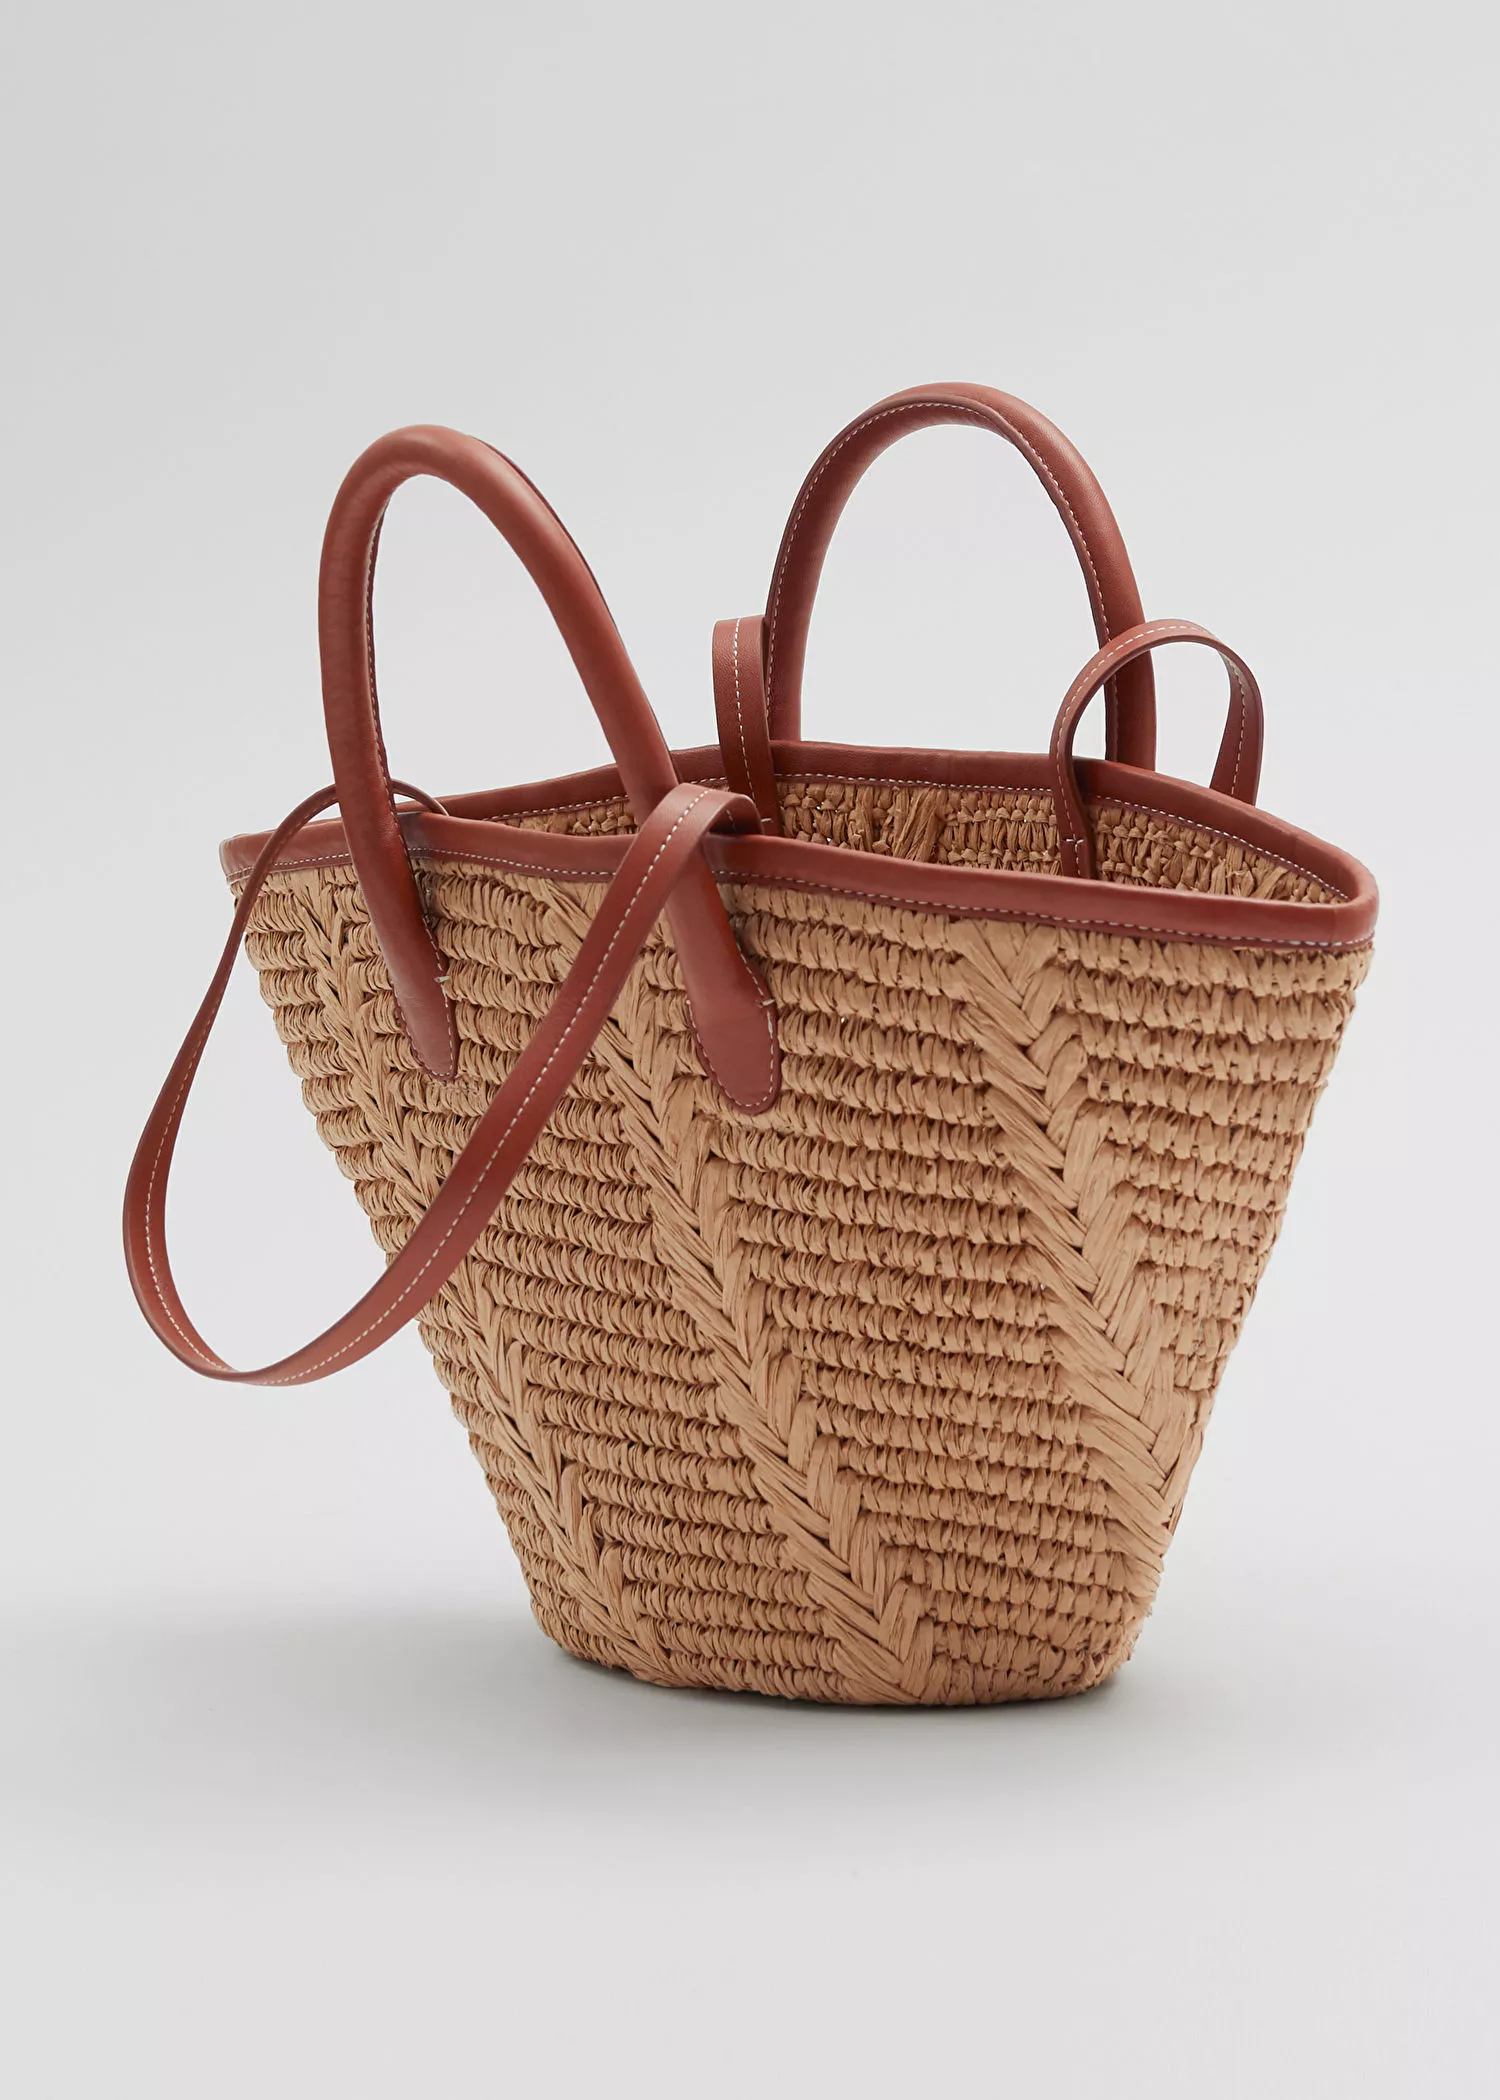  Other Stories Leather Trim Woven Bucket Bag in Natural